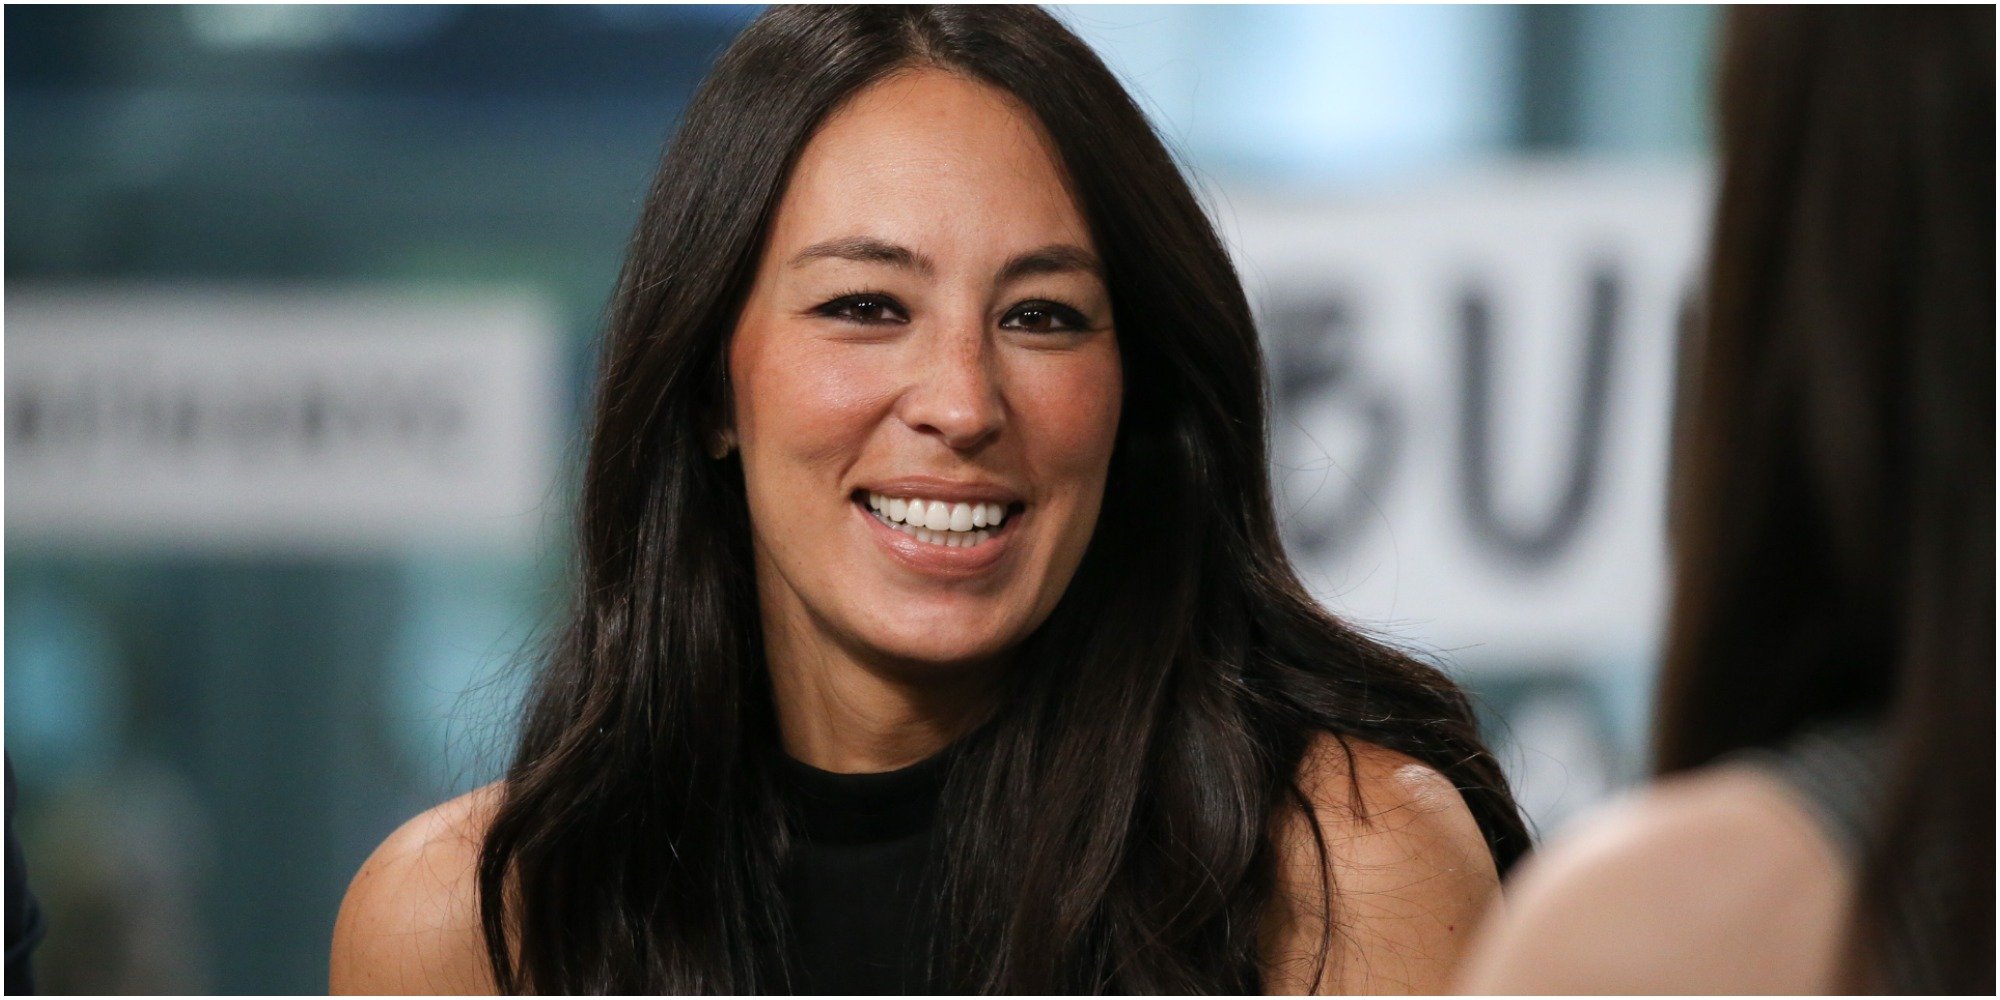 Joanna Gaines poses for a photograph.